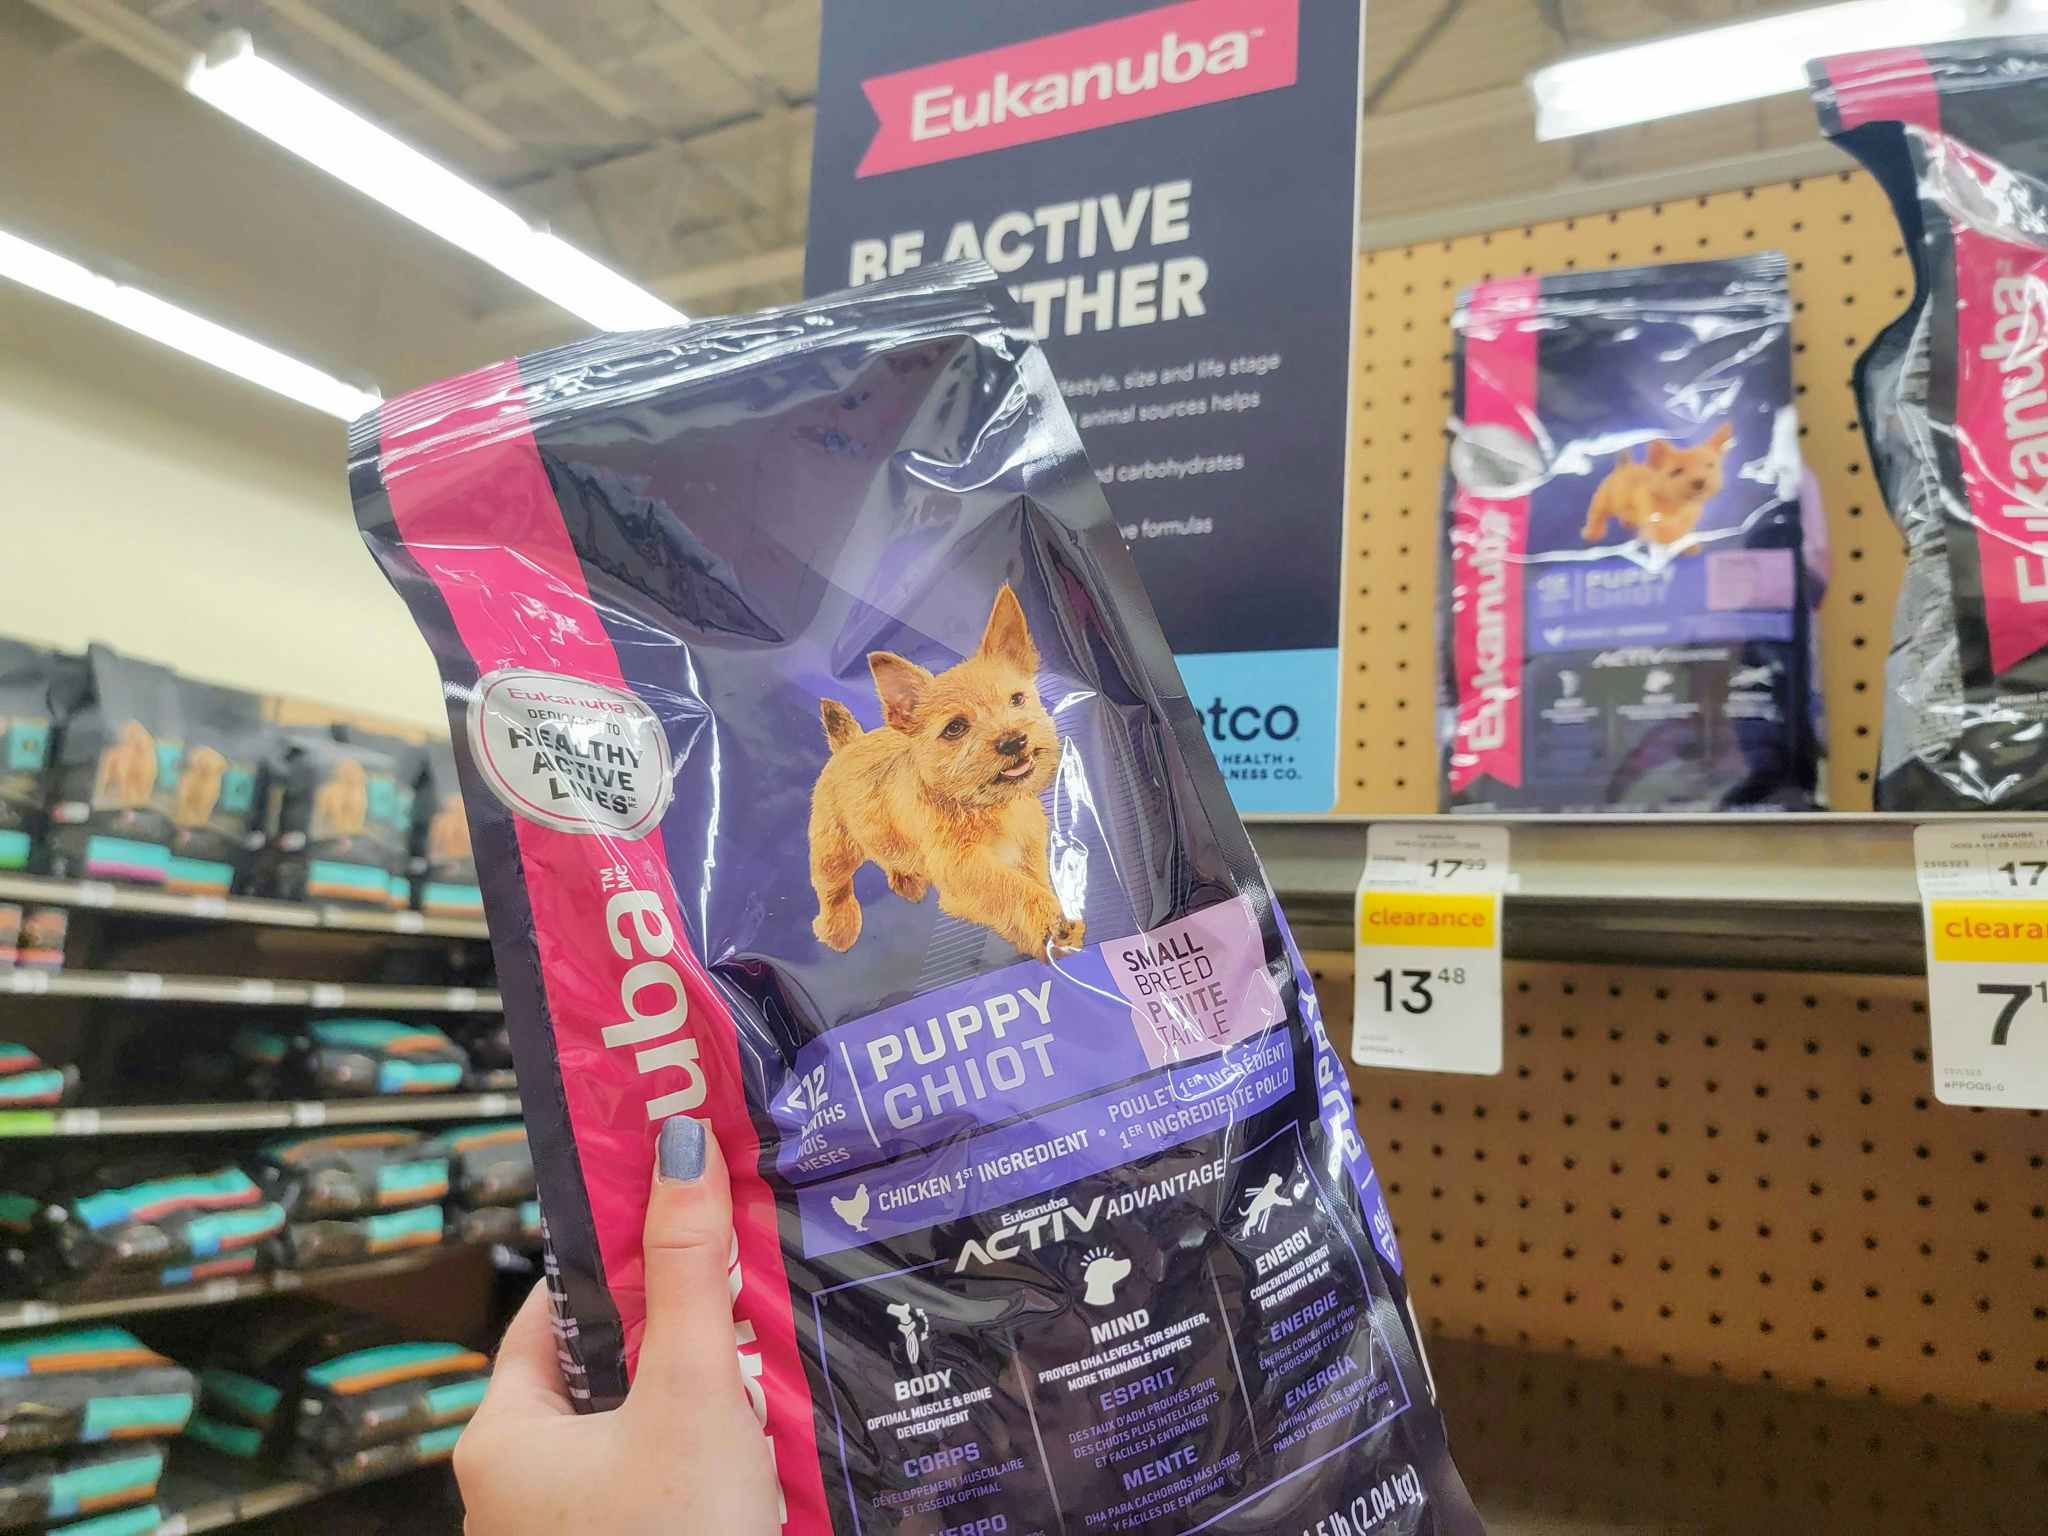 hand holding a bag of eukanuba puppy food